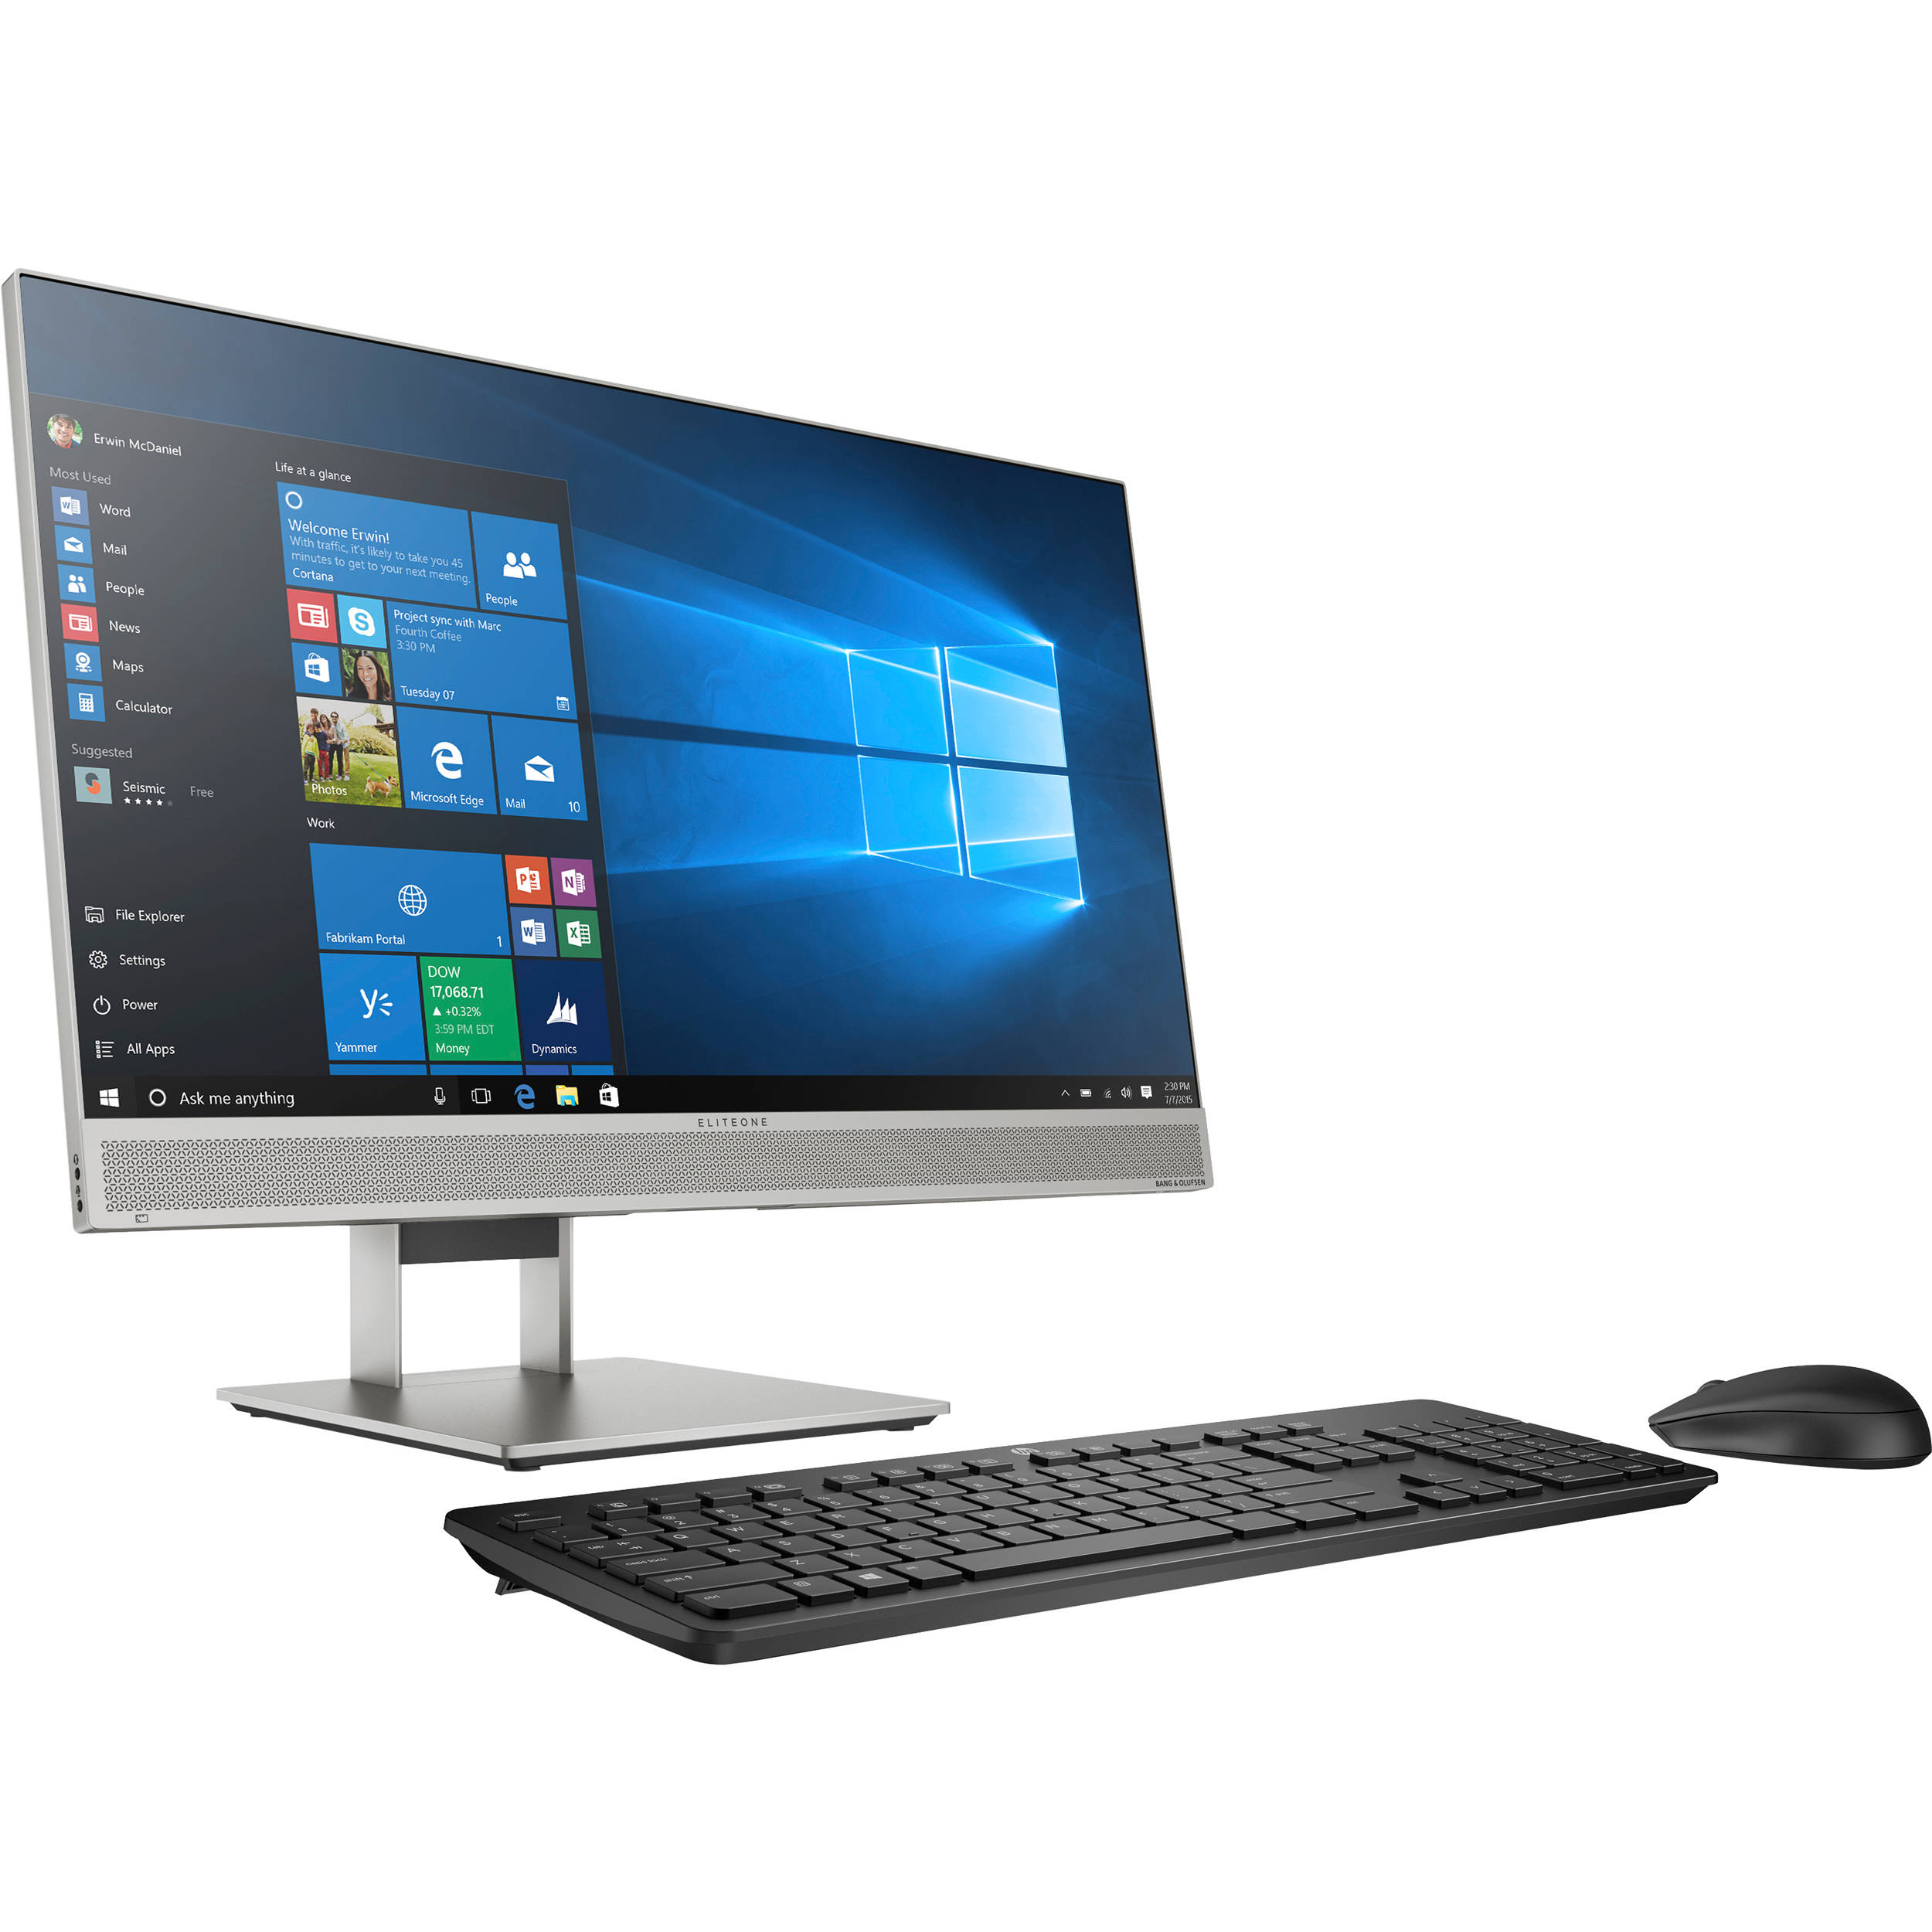 HP Elite One 800 G5 AiO Touch INTEL CORE I5-9500 3.0GHz SSD 256Gb RAM 8Gb WIN10 8NK19US#ABA